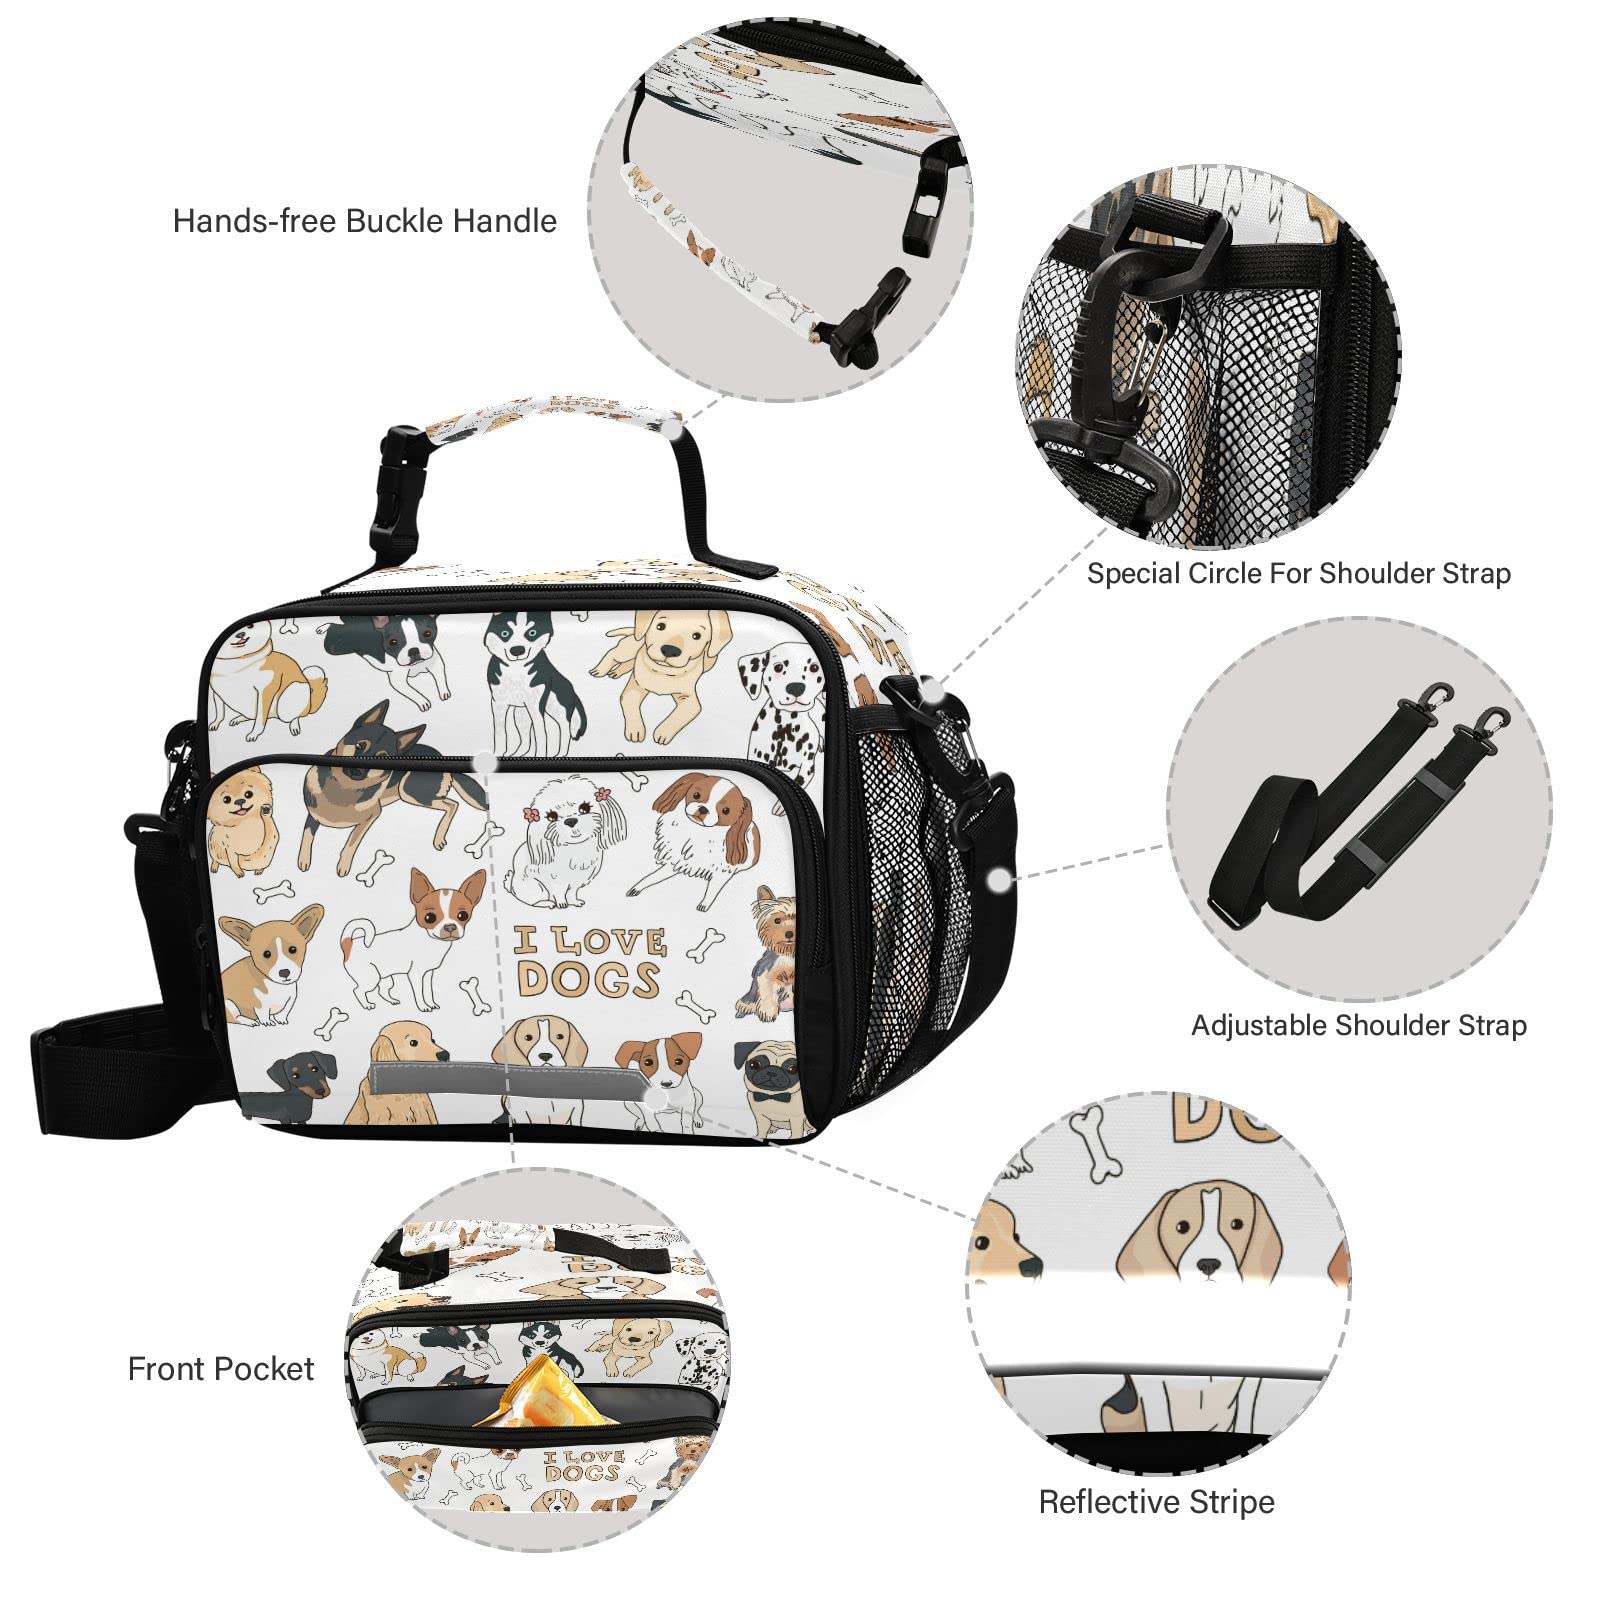 ALAZA Cute Dog Animal Doodle Lunch Bag Reusable Insulated Cooler Lunch Tote Bag With Adjustable Shoulder Strap For Office Work Picnic Travel,Size 11 X 4.33 X 9.05 Inch